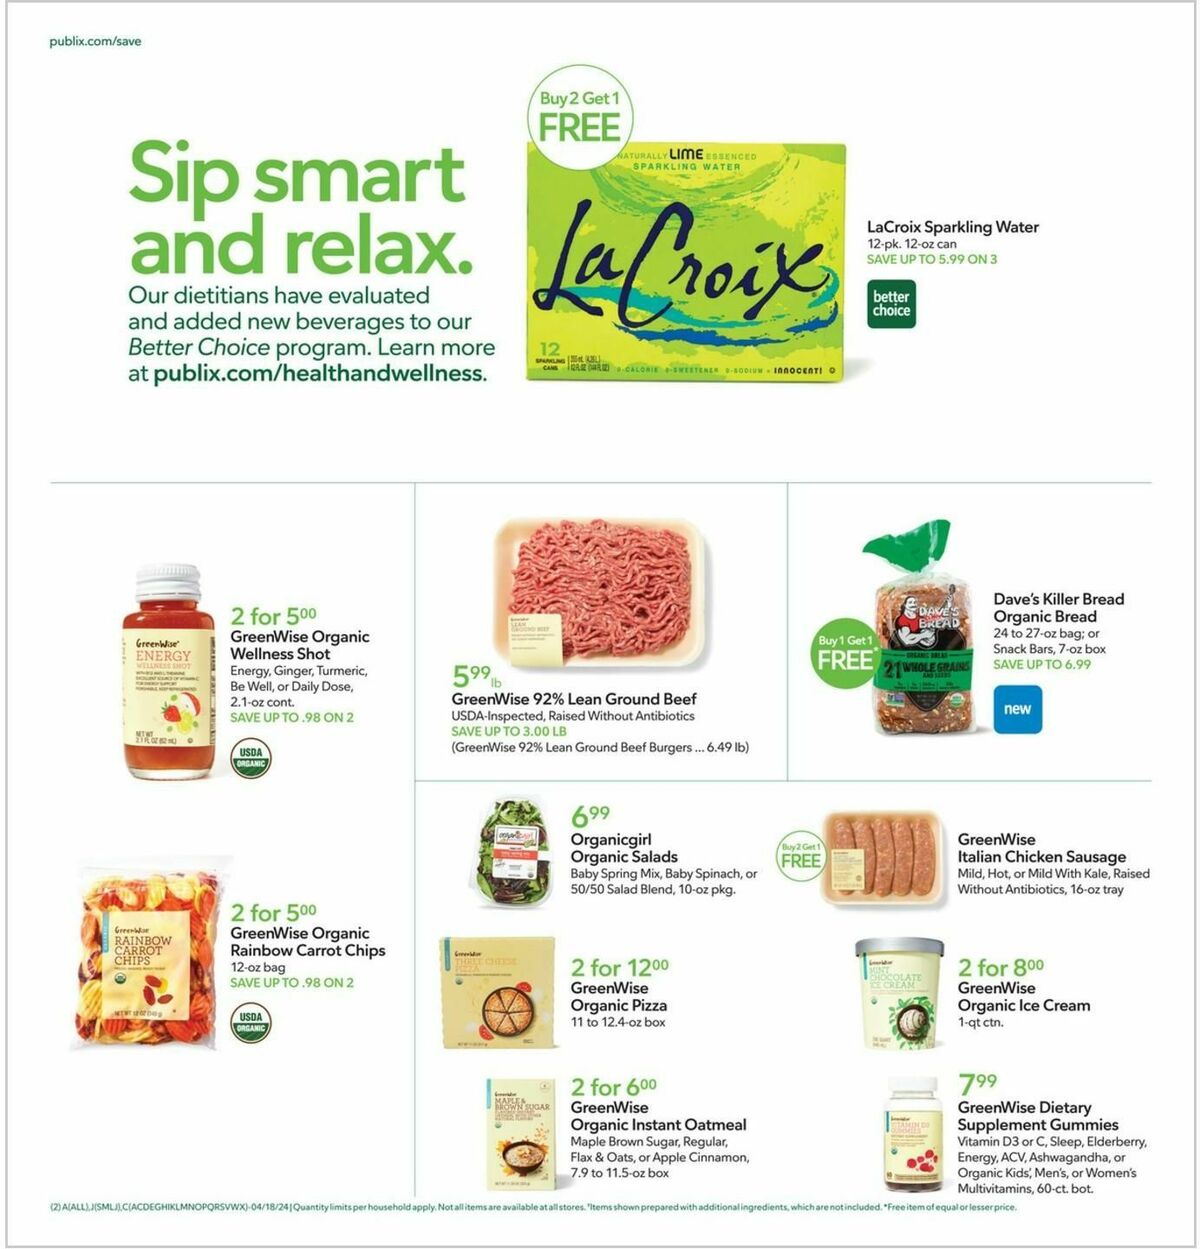 Publix Weekly Ad from April 17